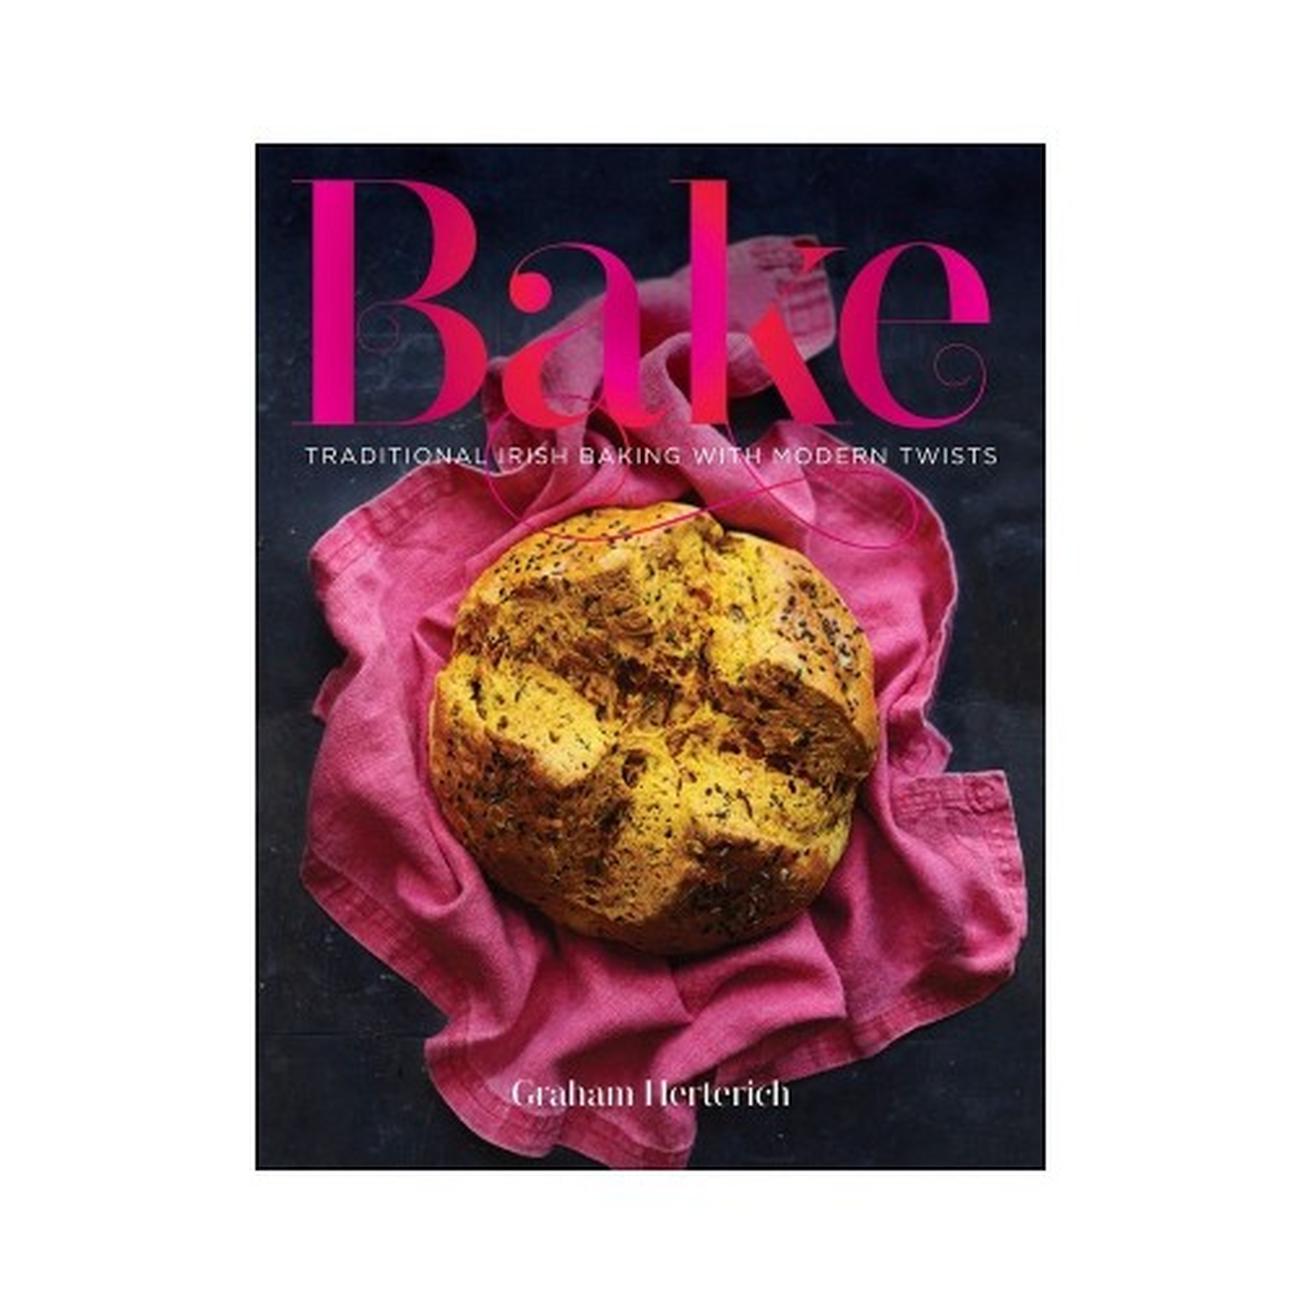 bake-by-Graham-Herterich-cookbook - Bake by Graham Herterich (limited signed copies)